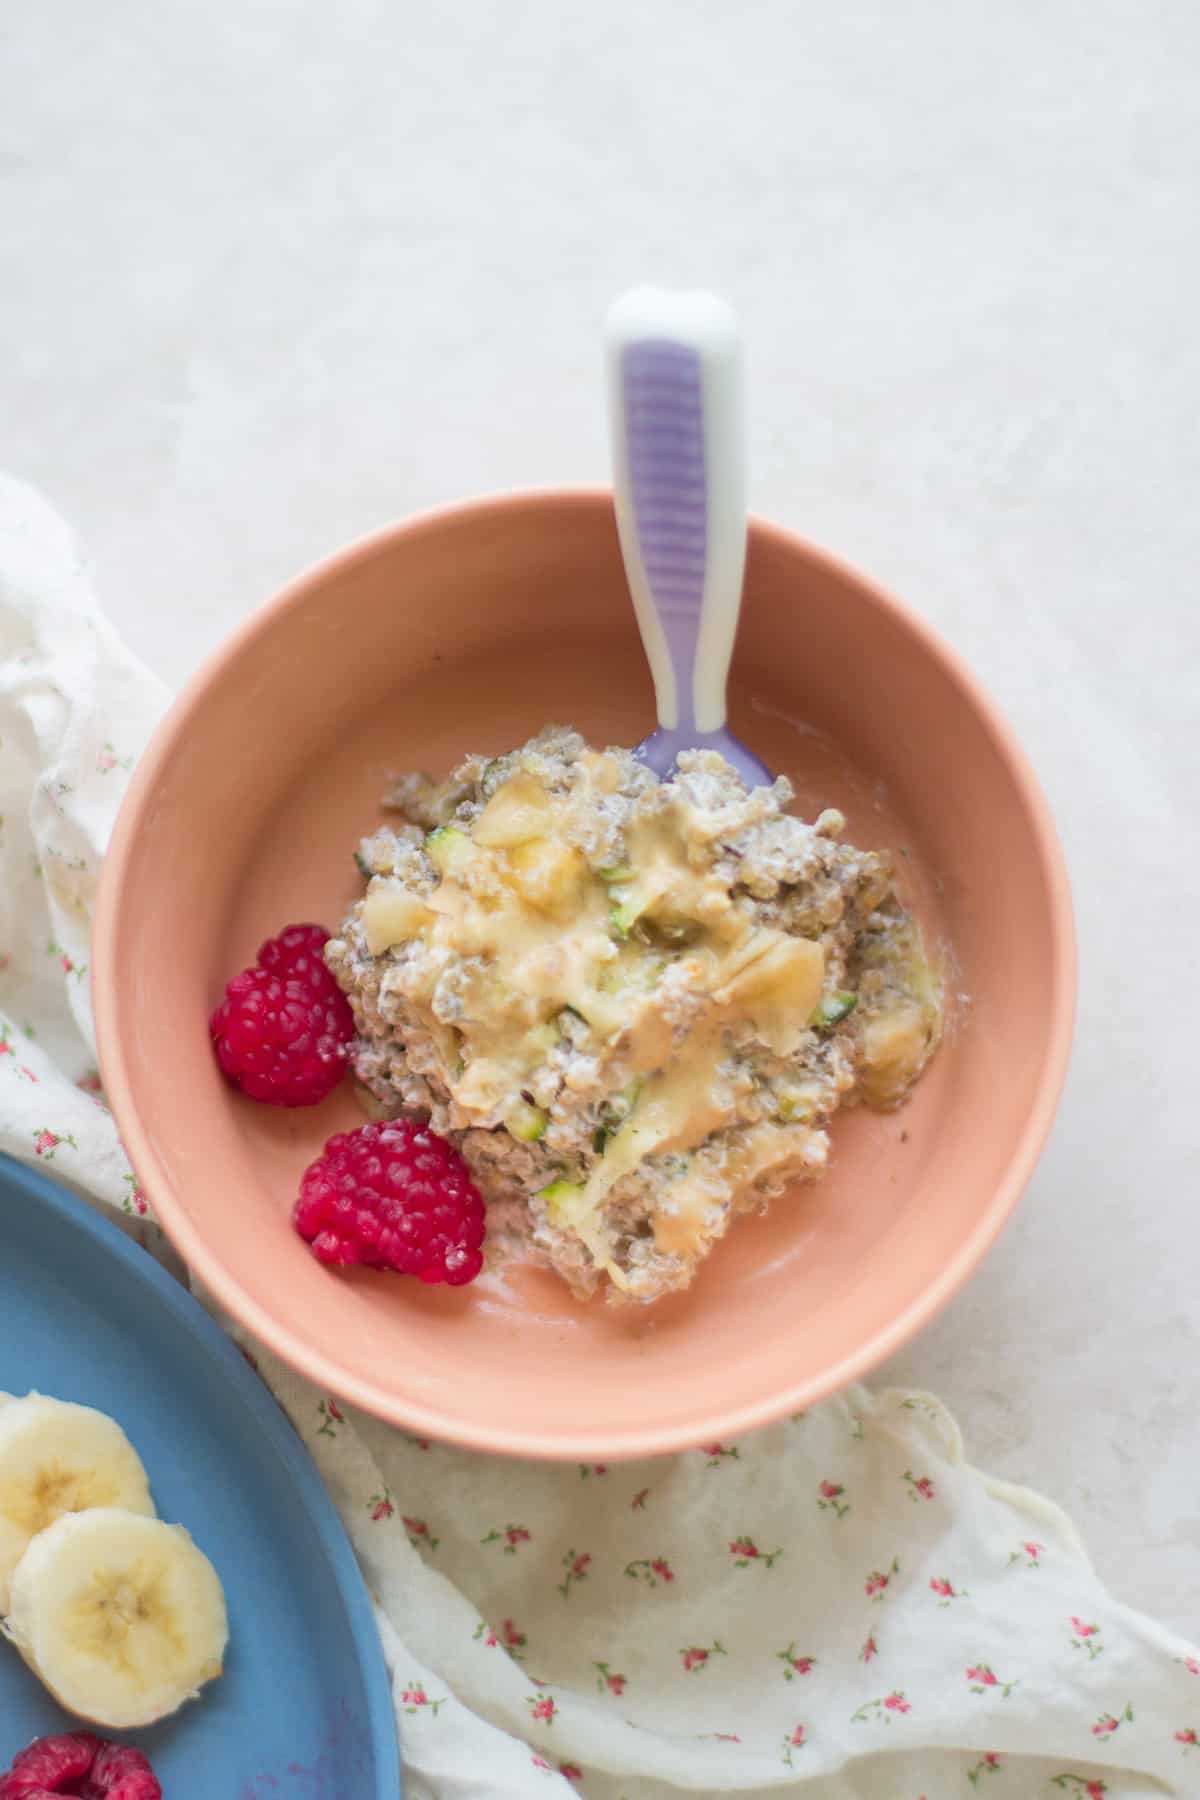 Quinoa bake served in a baby bowl with thinned out peanut butter and two raspberries.